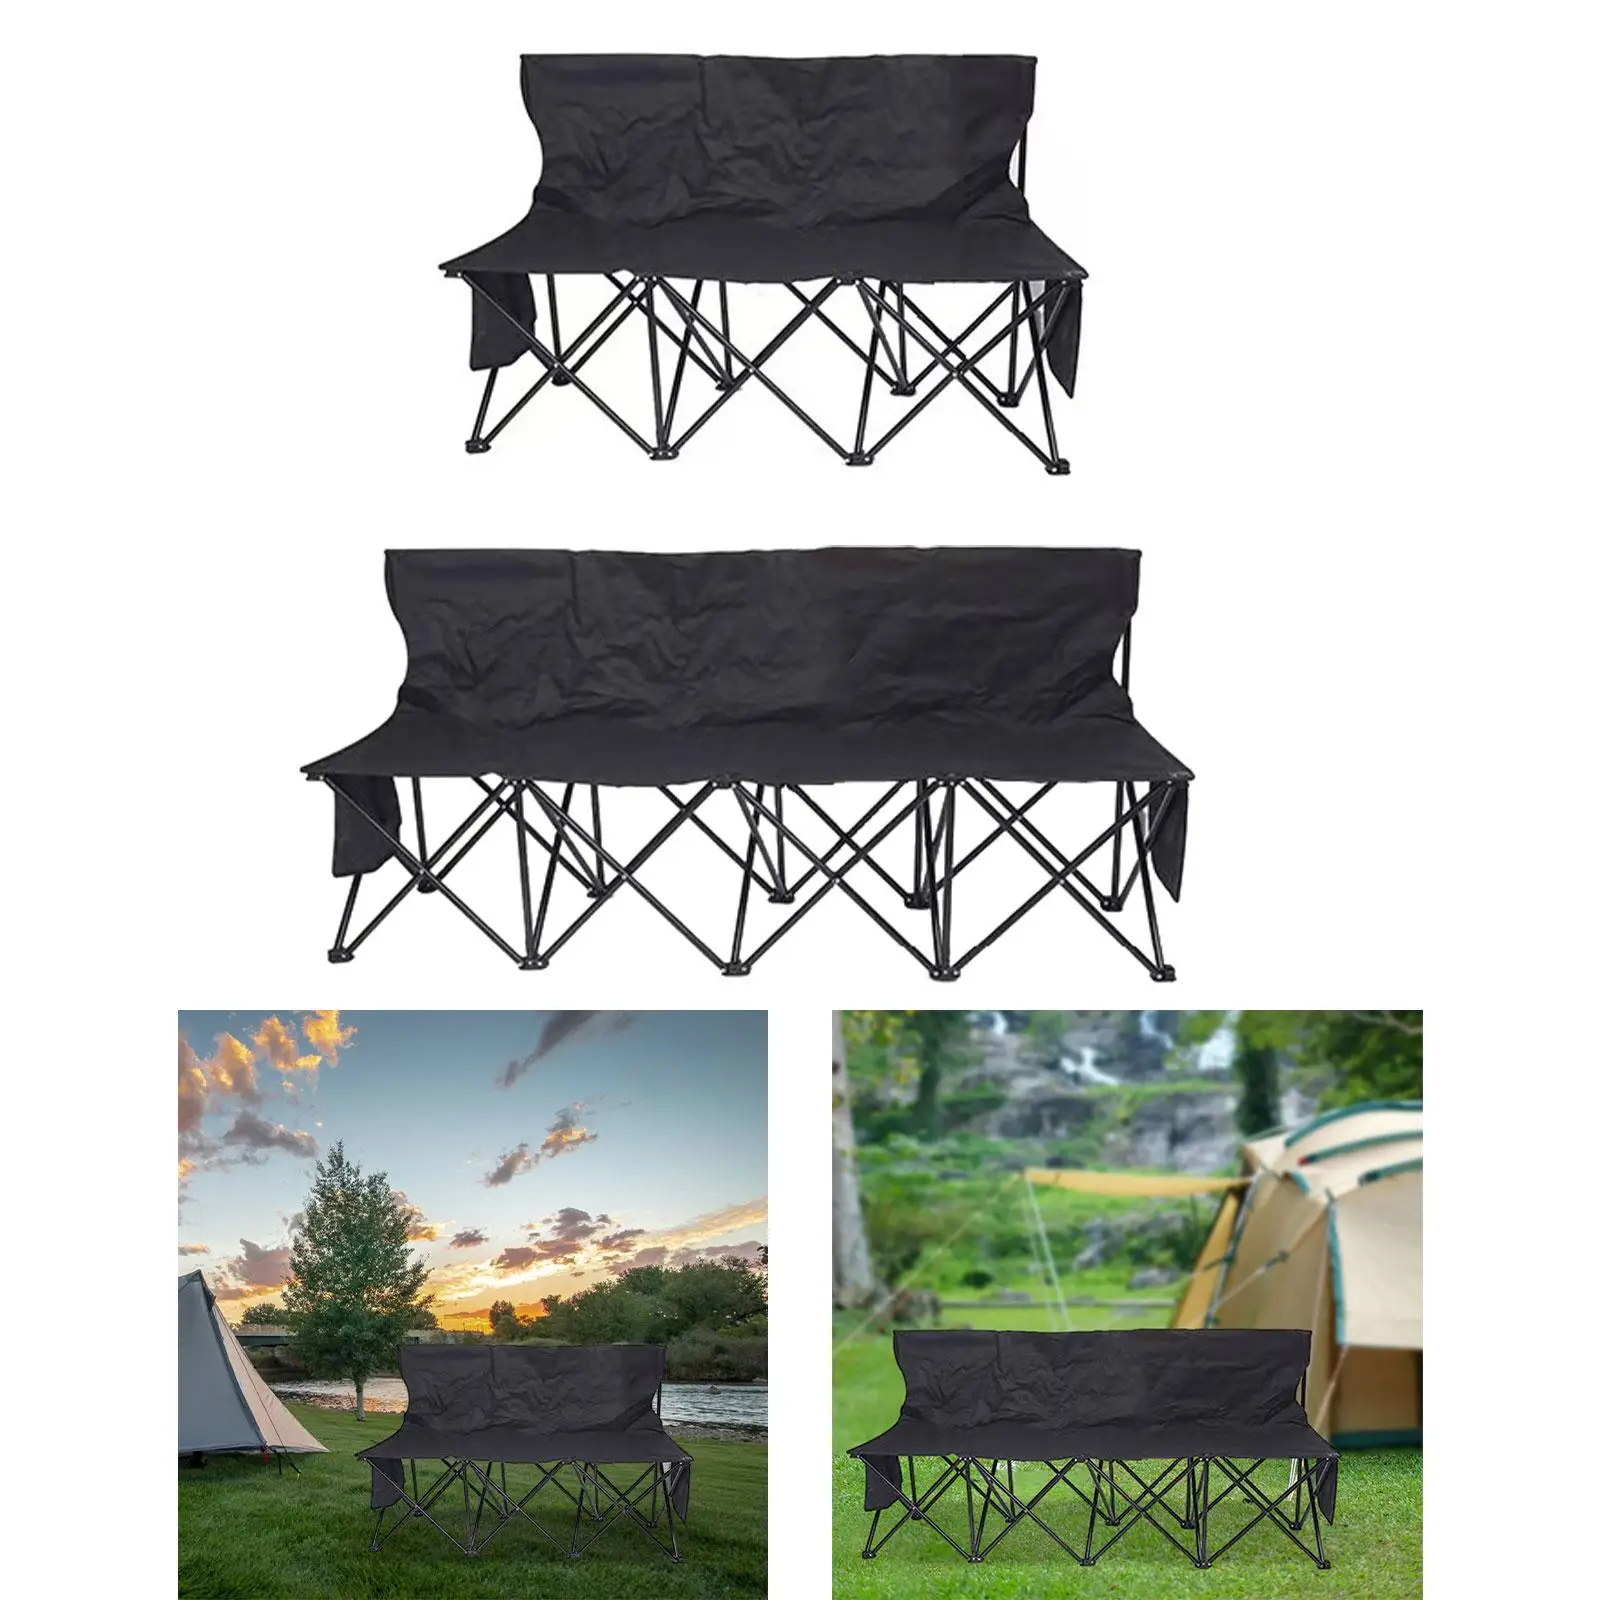 Folding Bench Chair for Adults Multi Person Portable Sideline Bench Foldable for Lawn Events Backyard Soccer Football Camping